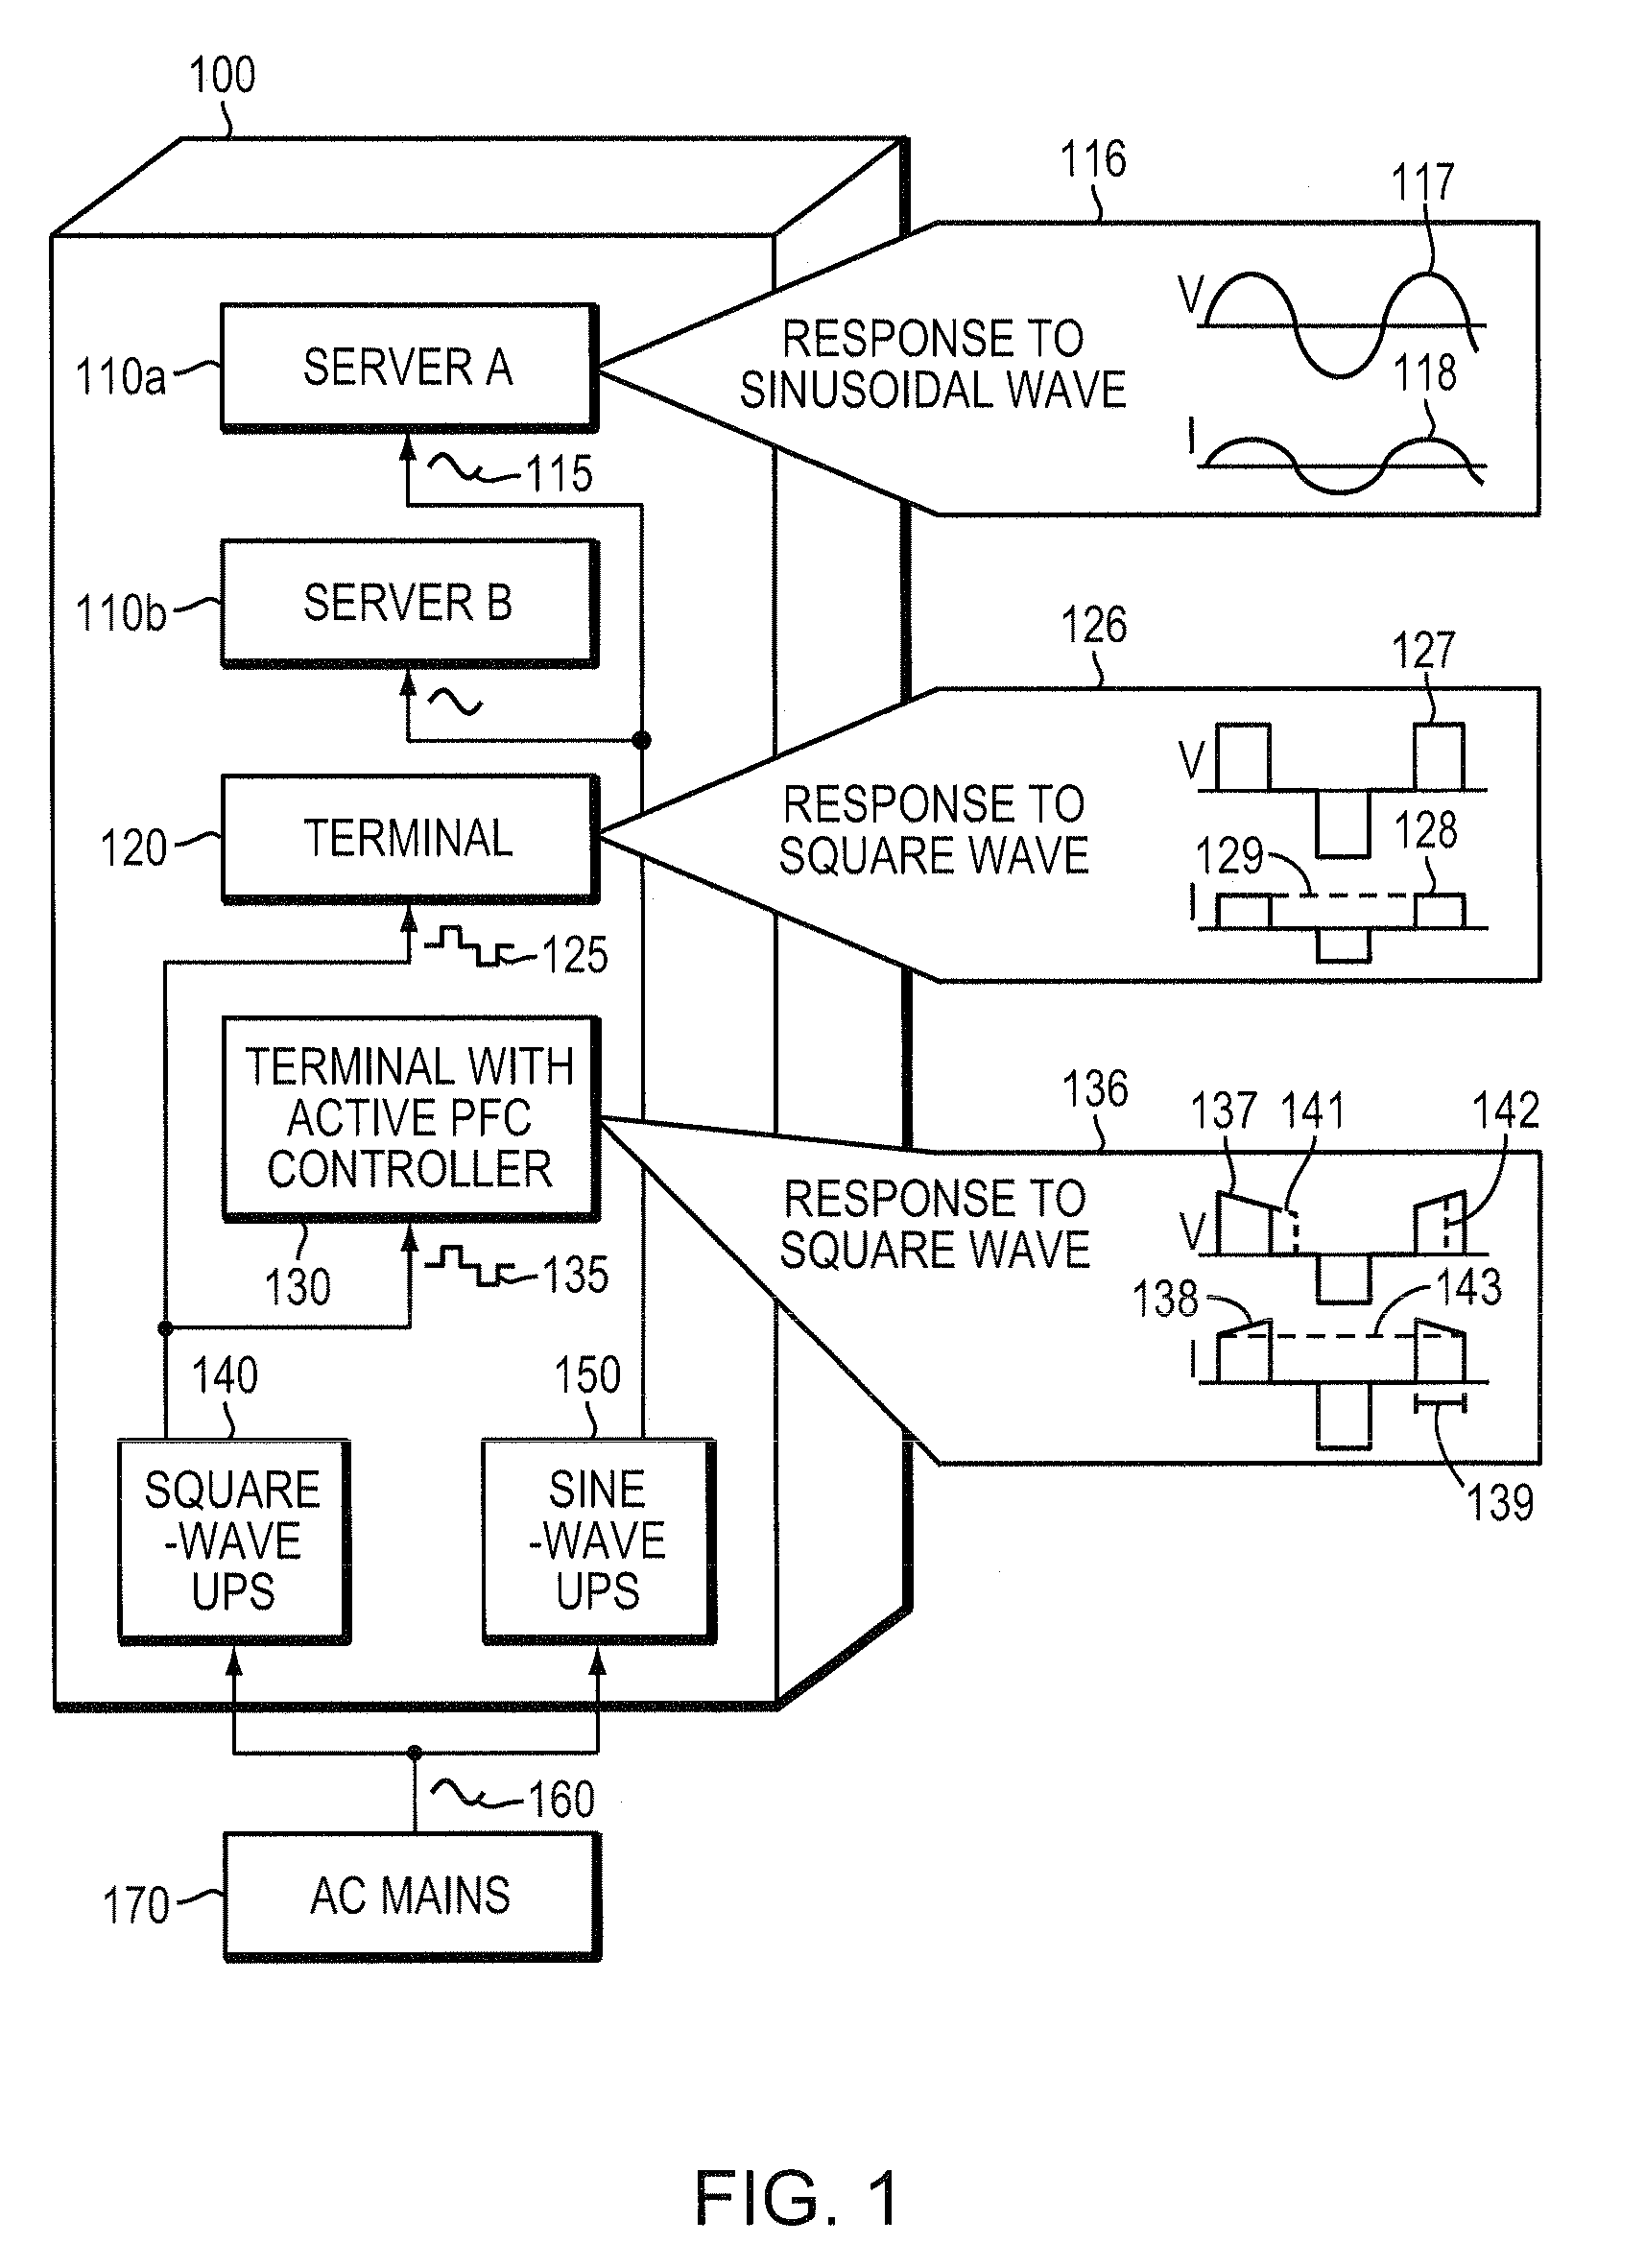 Method and apparatus for providing a power factor correction (PFC) compatible solution for nonsinusoidal uninterruptible power supply (UPS)